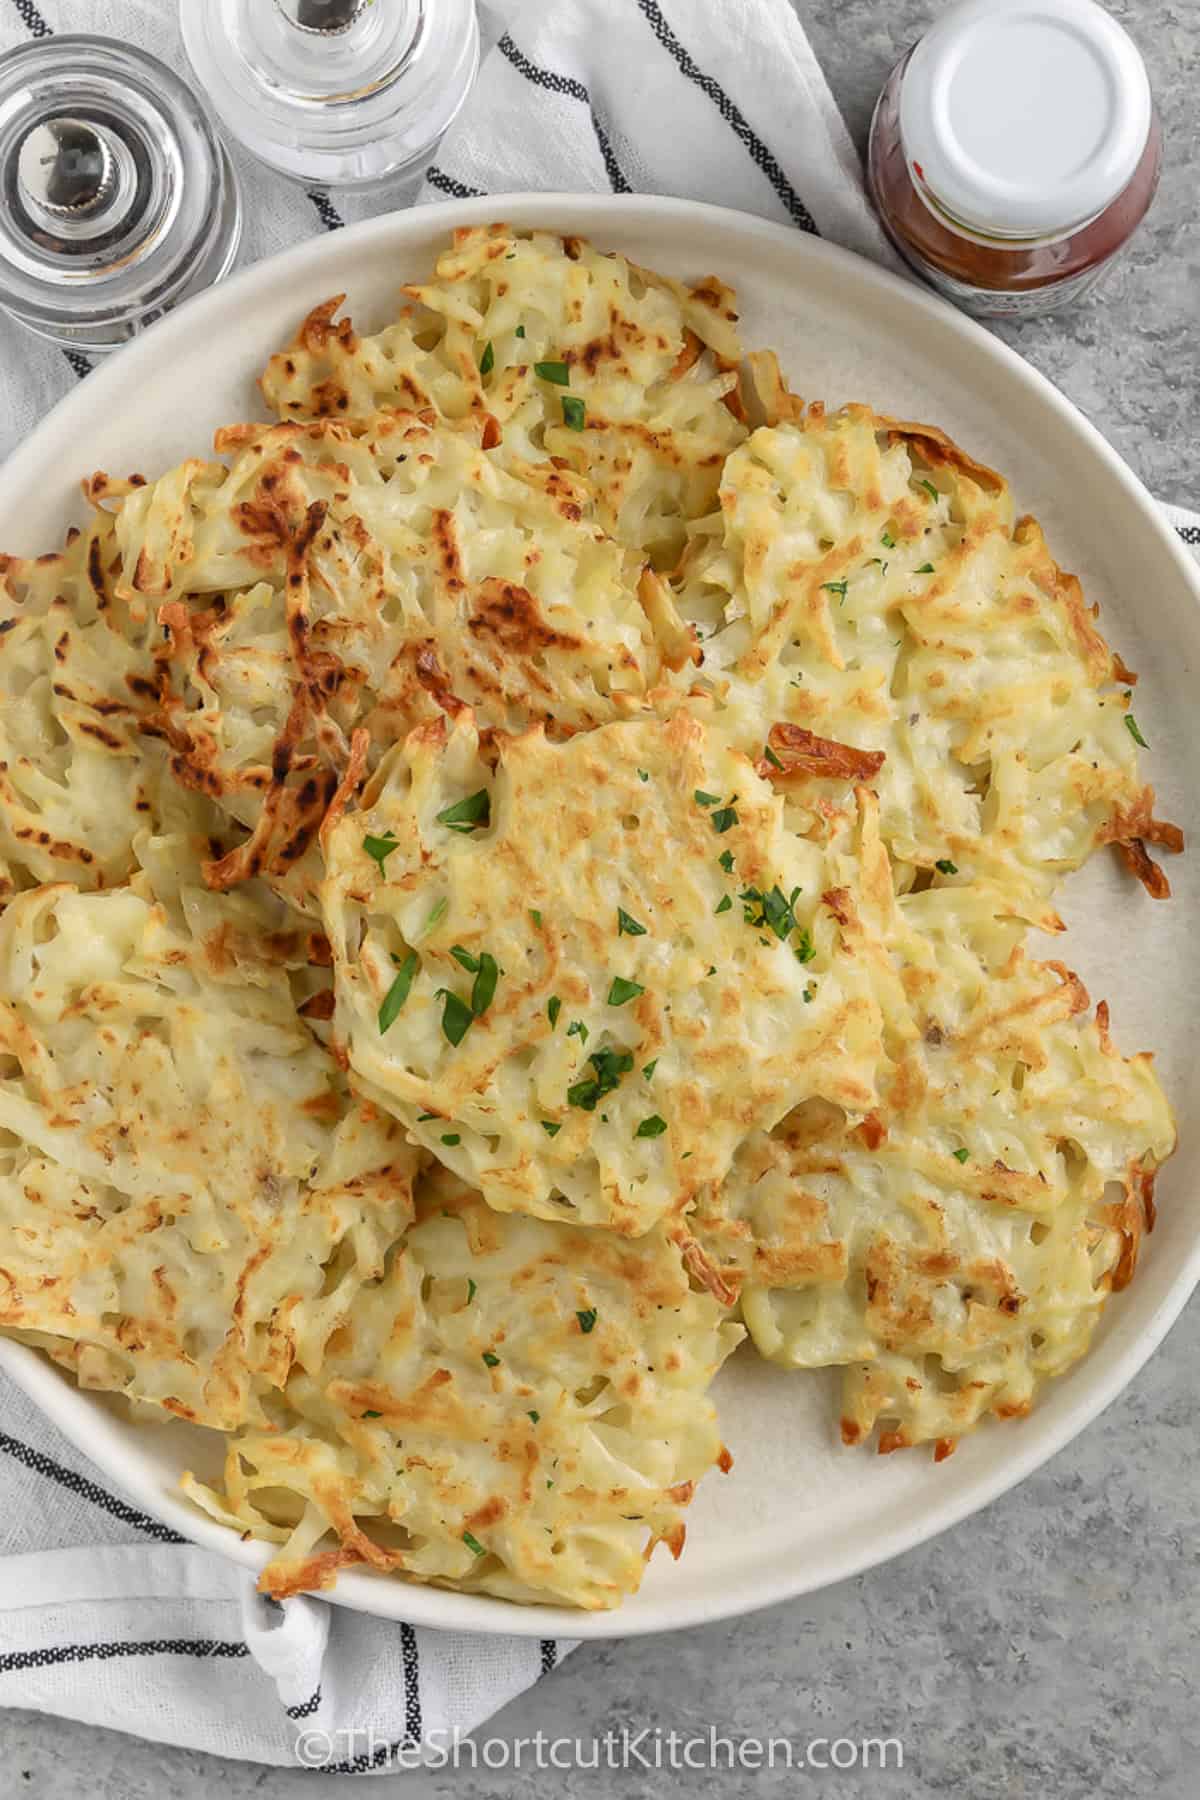 Homemade Hash Browns on a plate